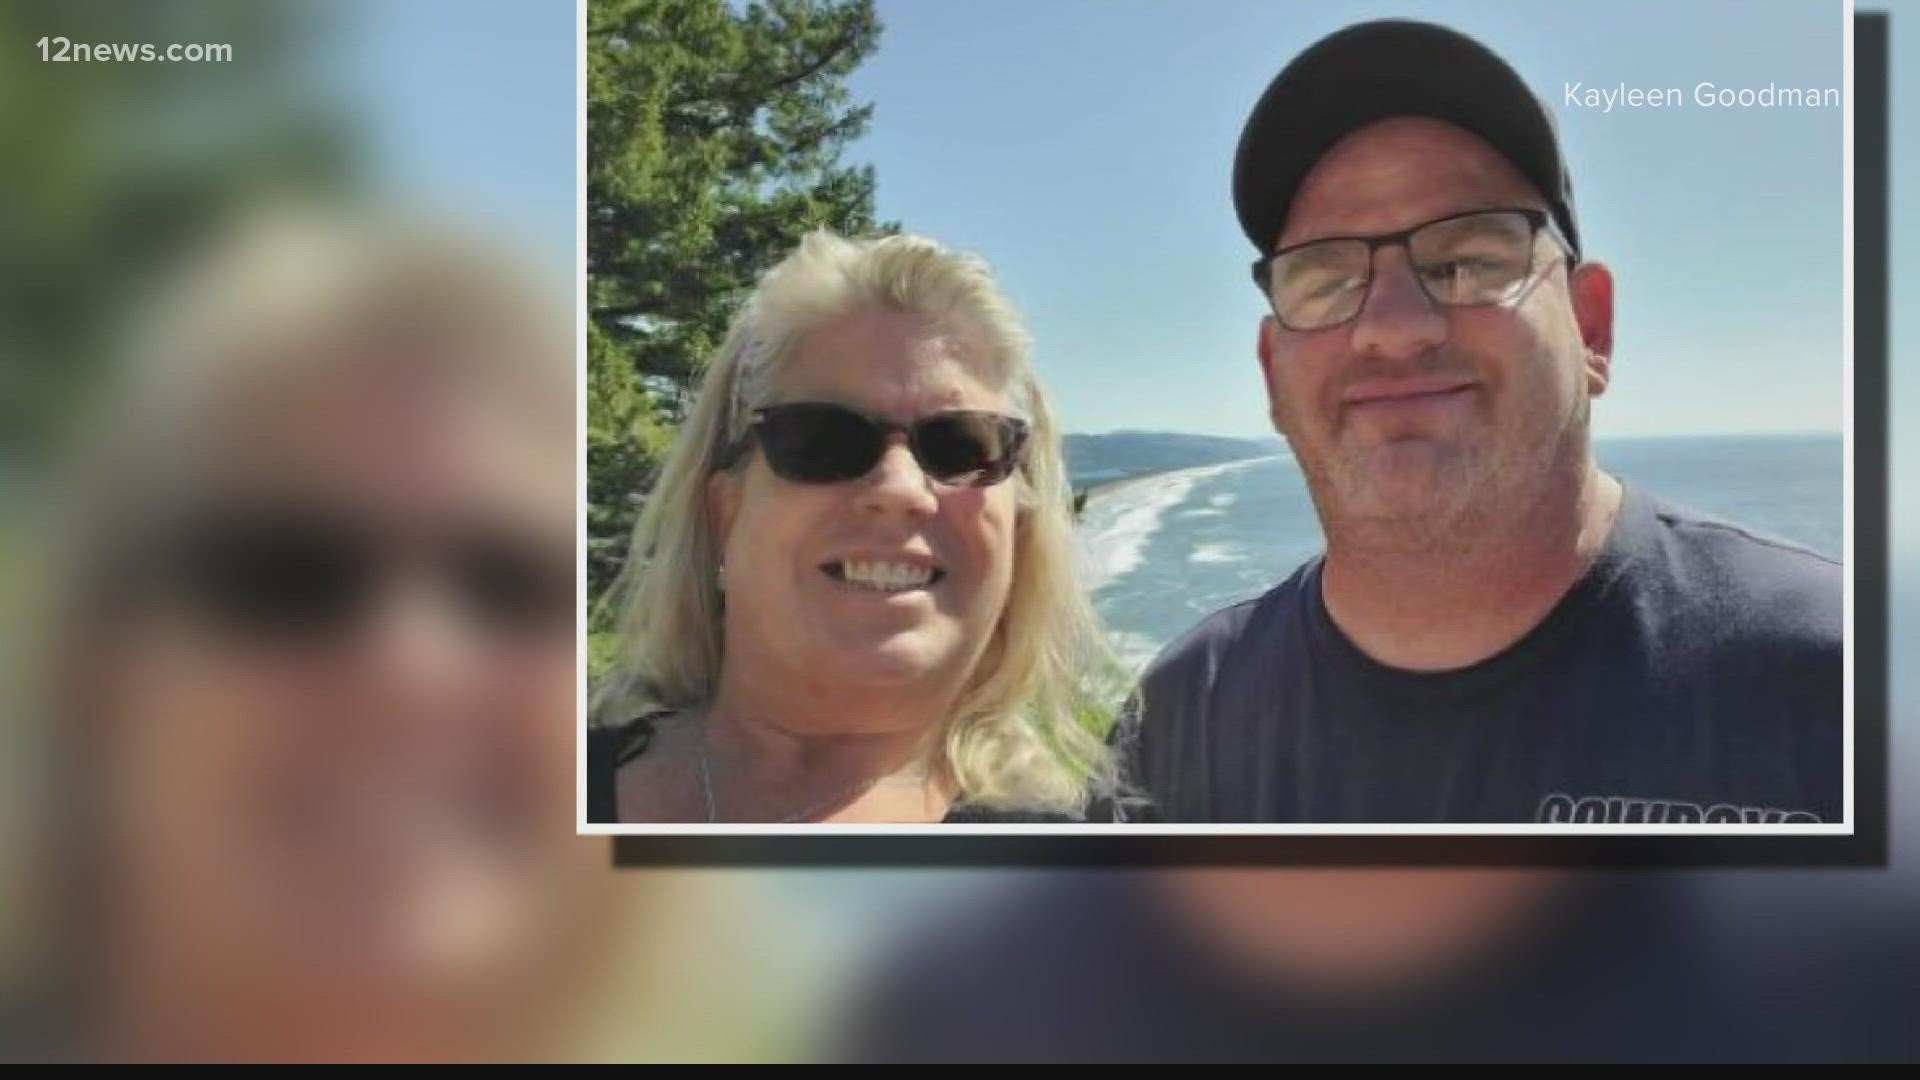 A bizarre accident left a Peoria grandmother of 15 and her fiancé dead while they were on a road trip out of state.